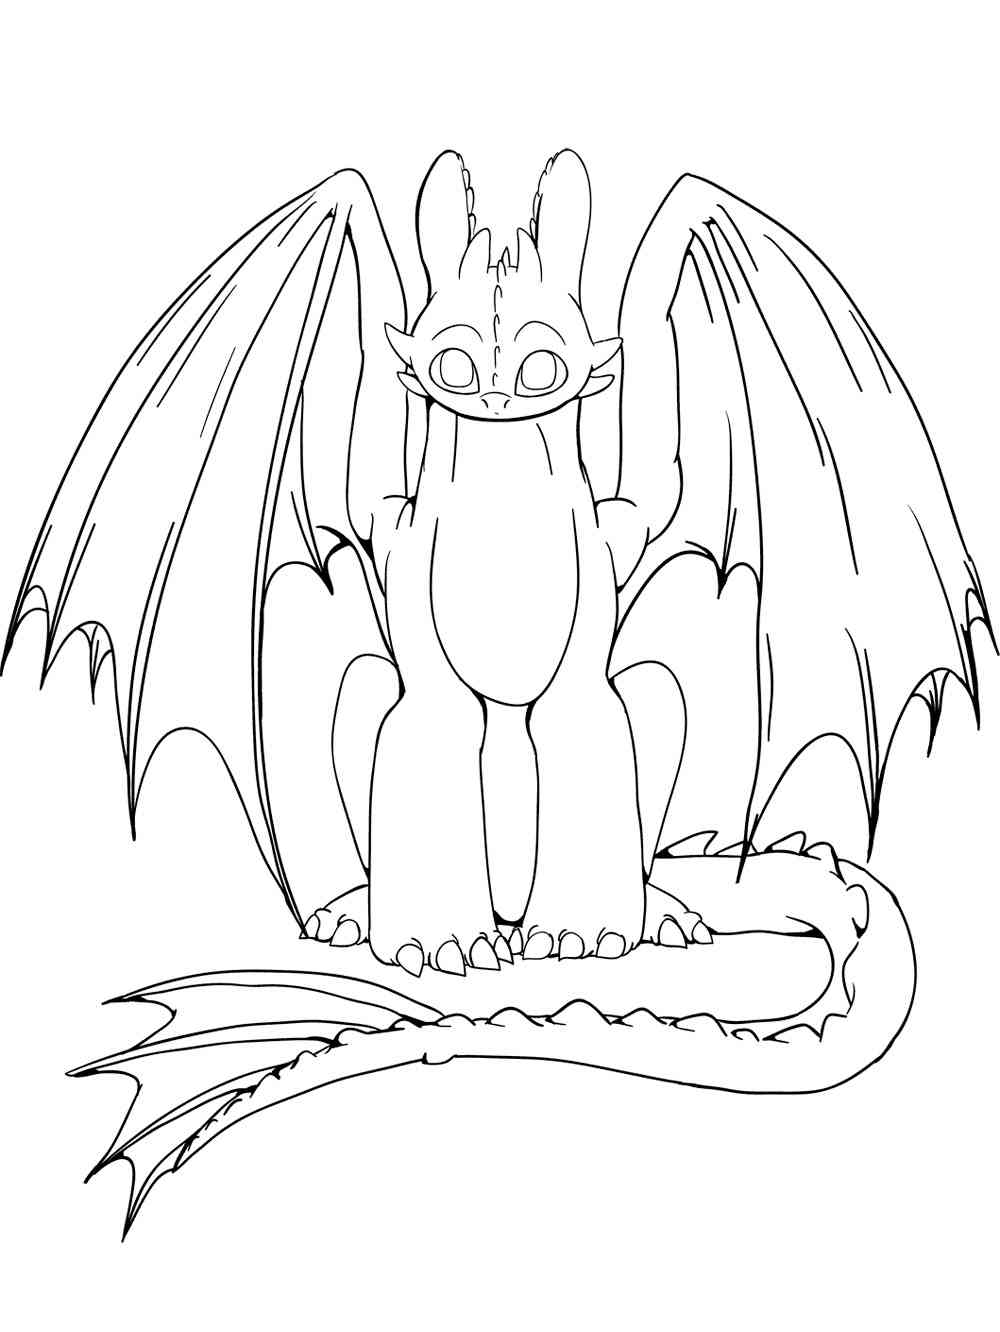 How To Train Your Dragon 4 coloring page